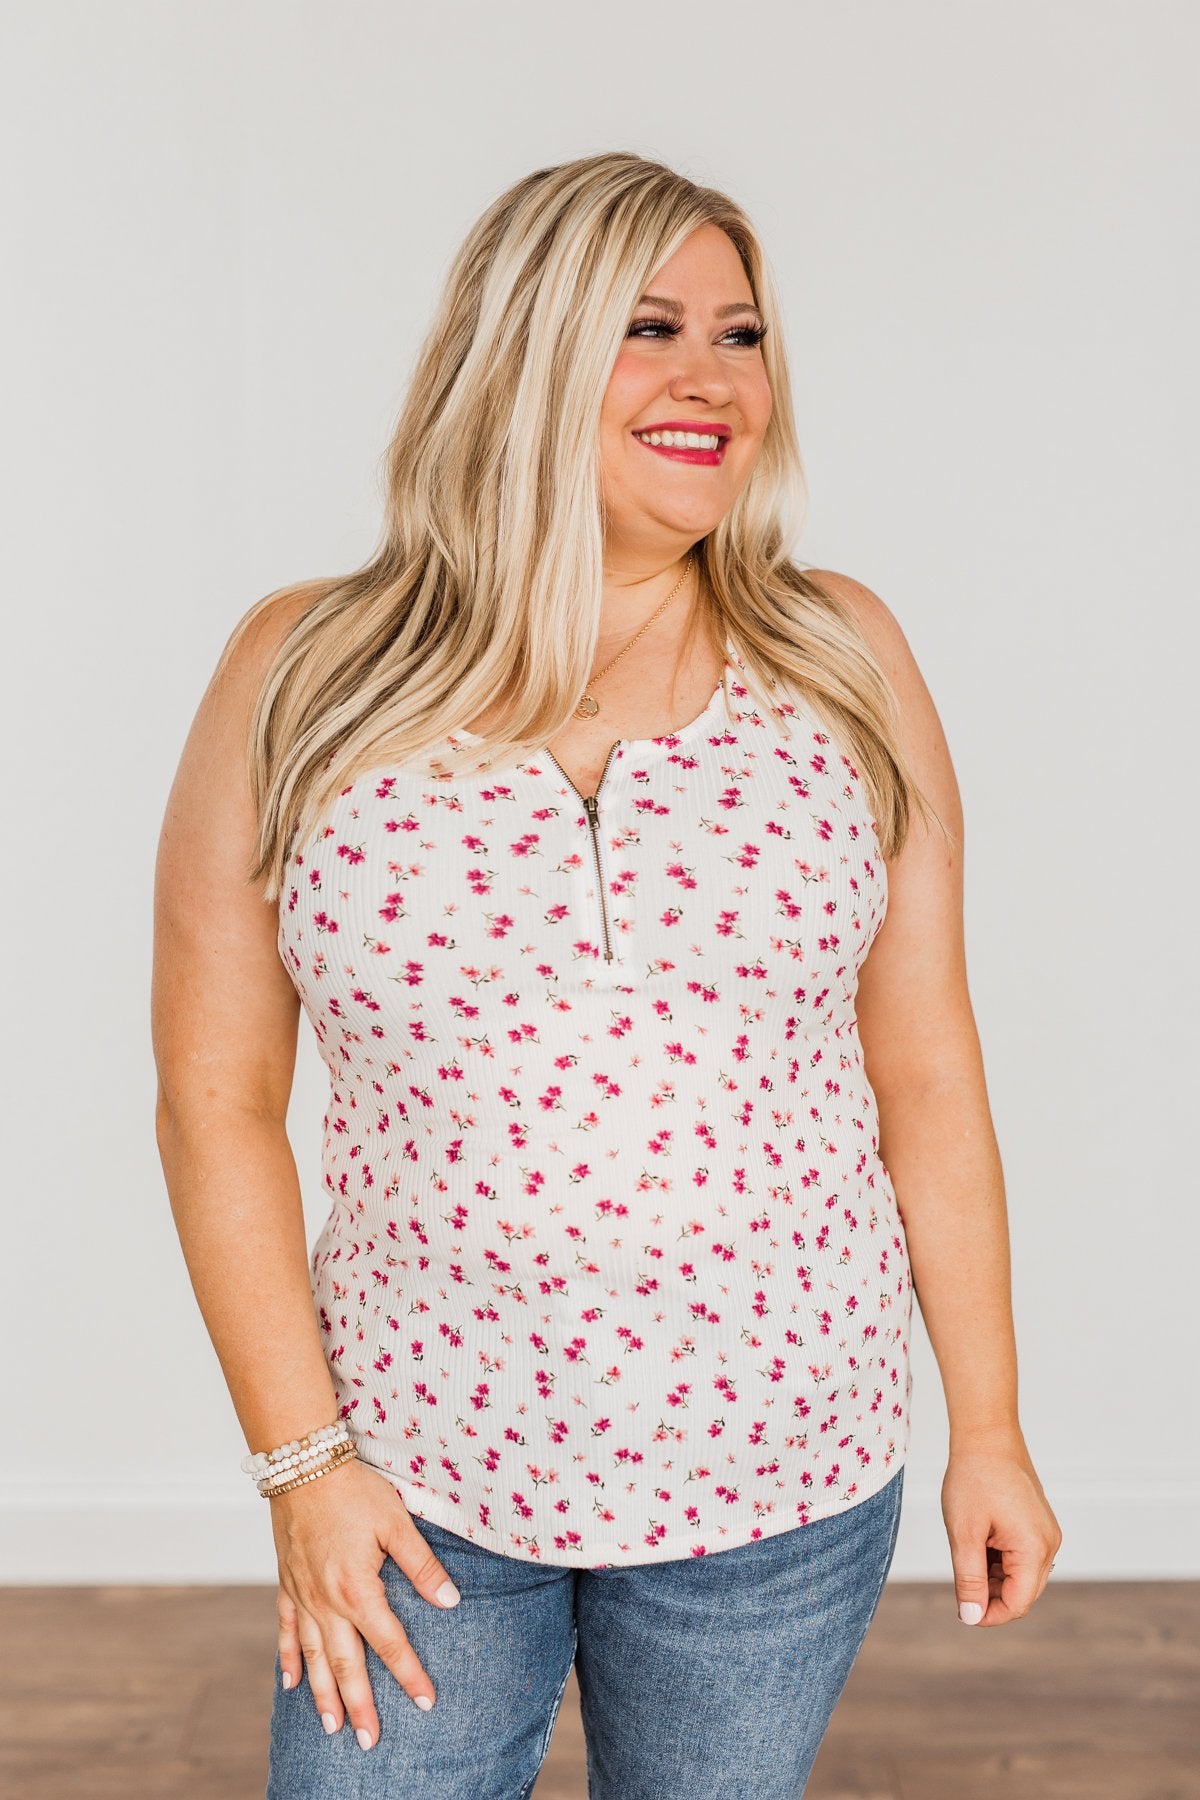 Everlasting Moments Floral Zipper Henley Tank Top- Ivory